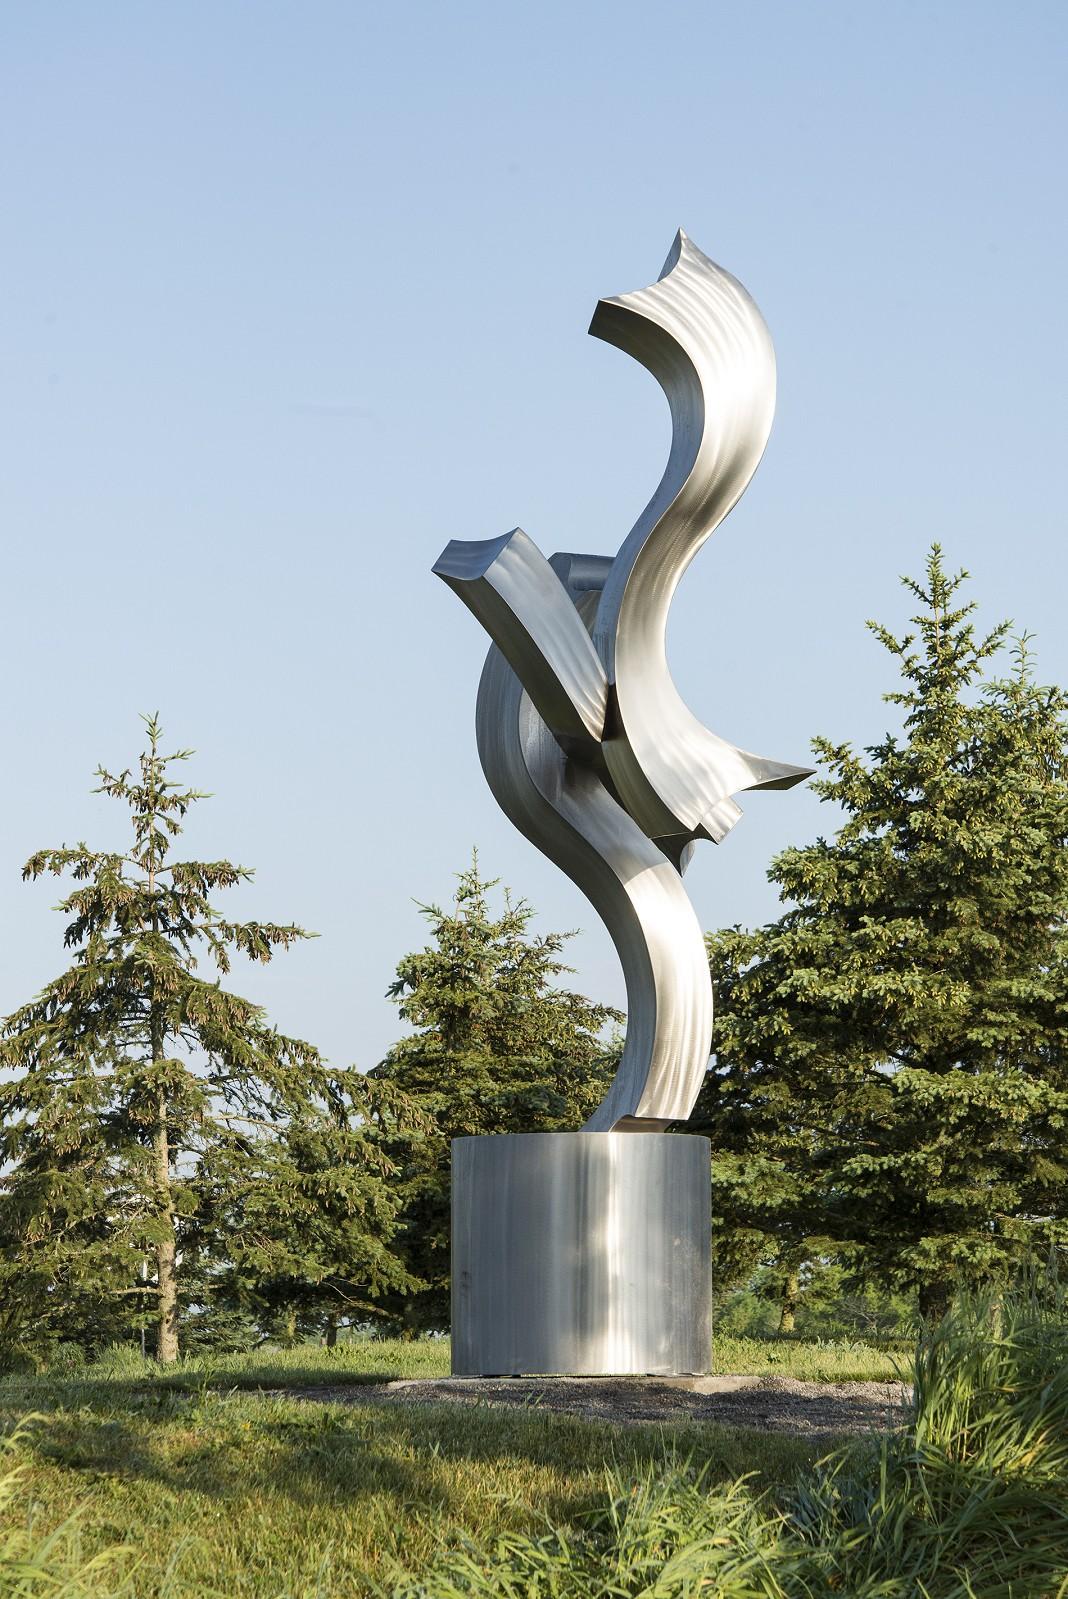 Soaring Embrace - rippling s-curved bands of stainless steel outdoor sculpture - Abstract Sculpture by Kevin Robb